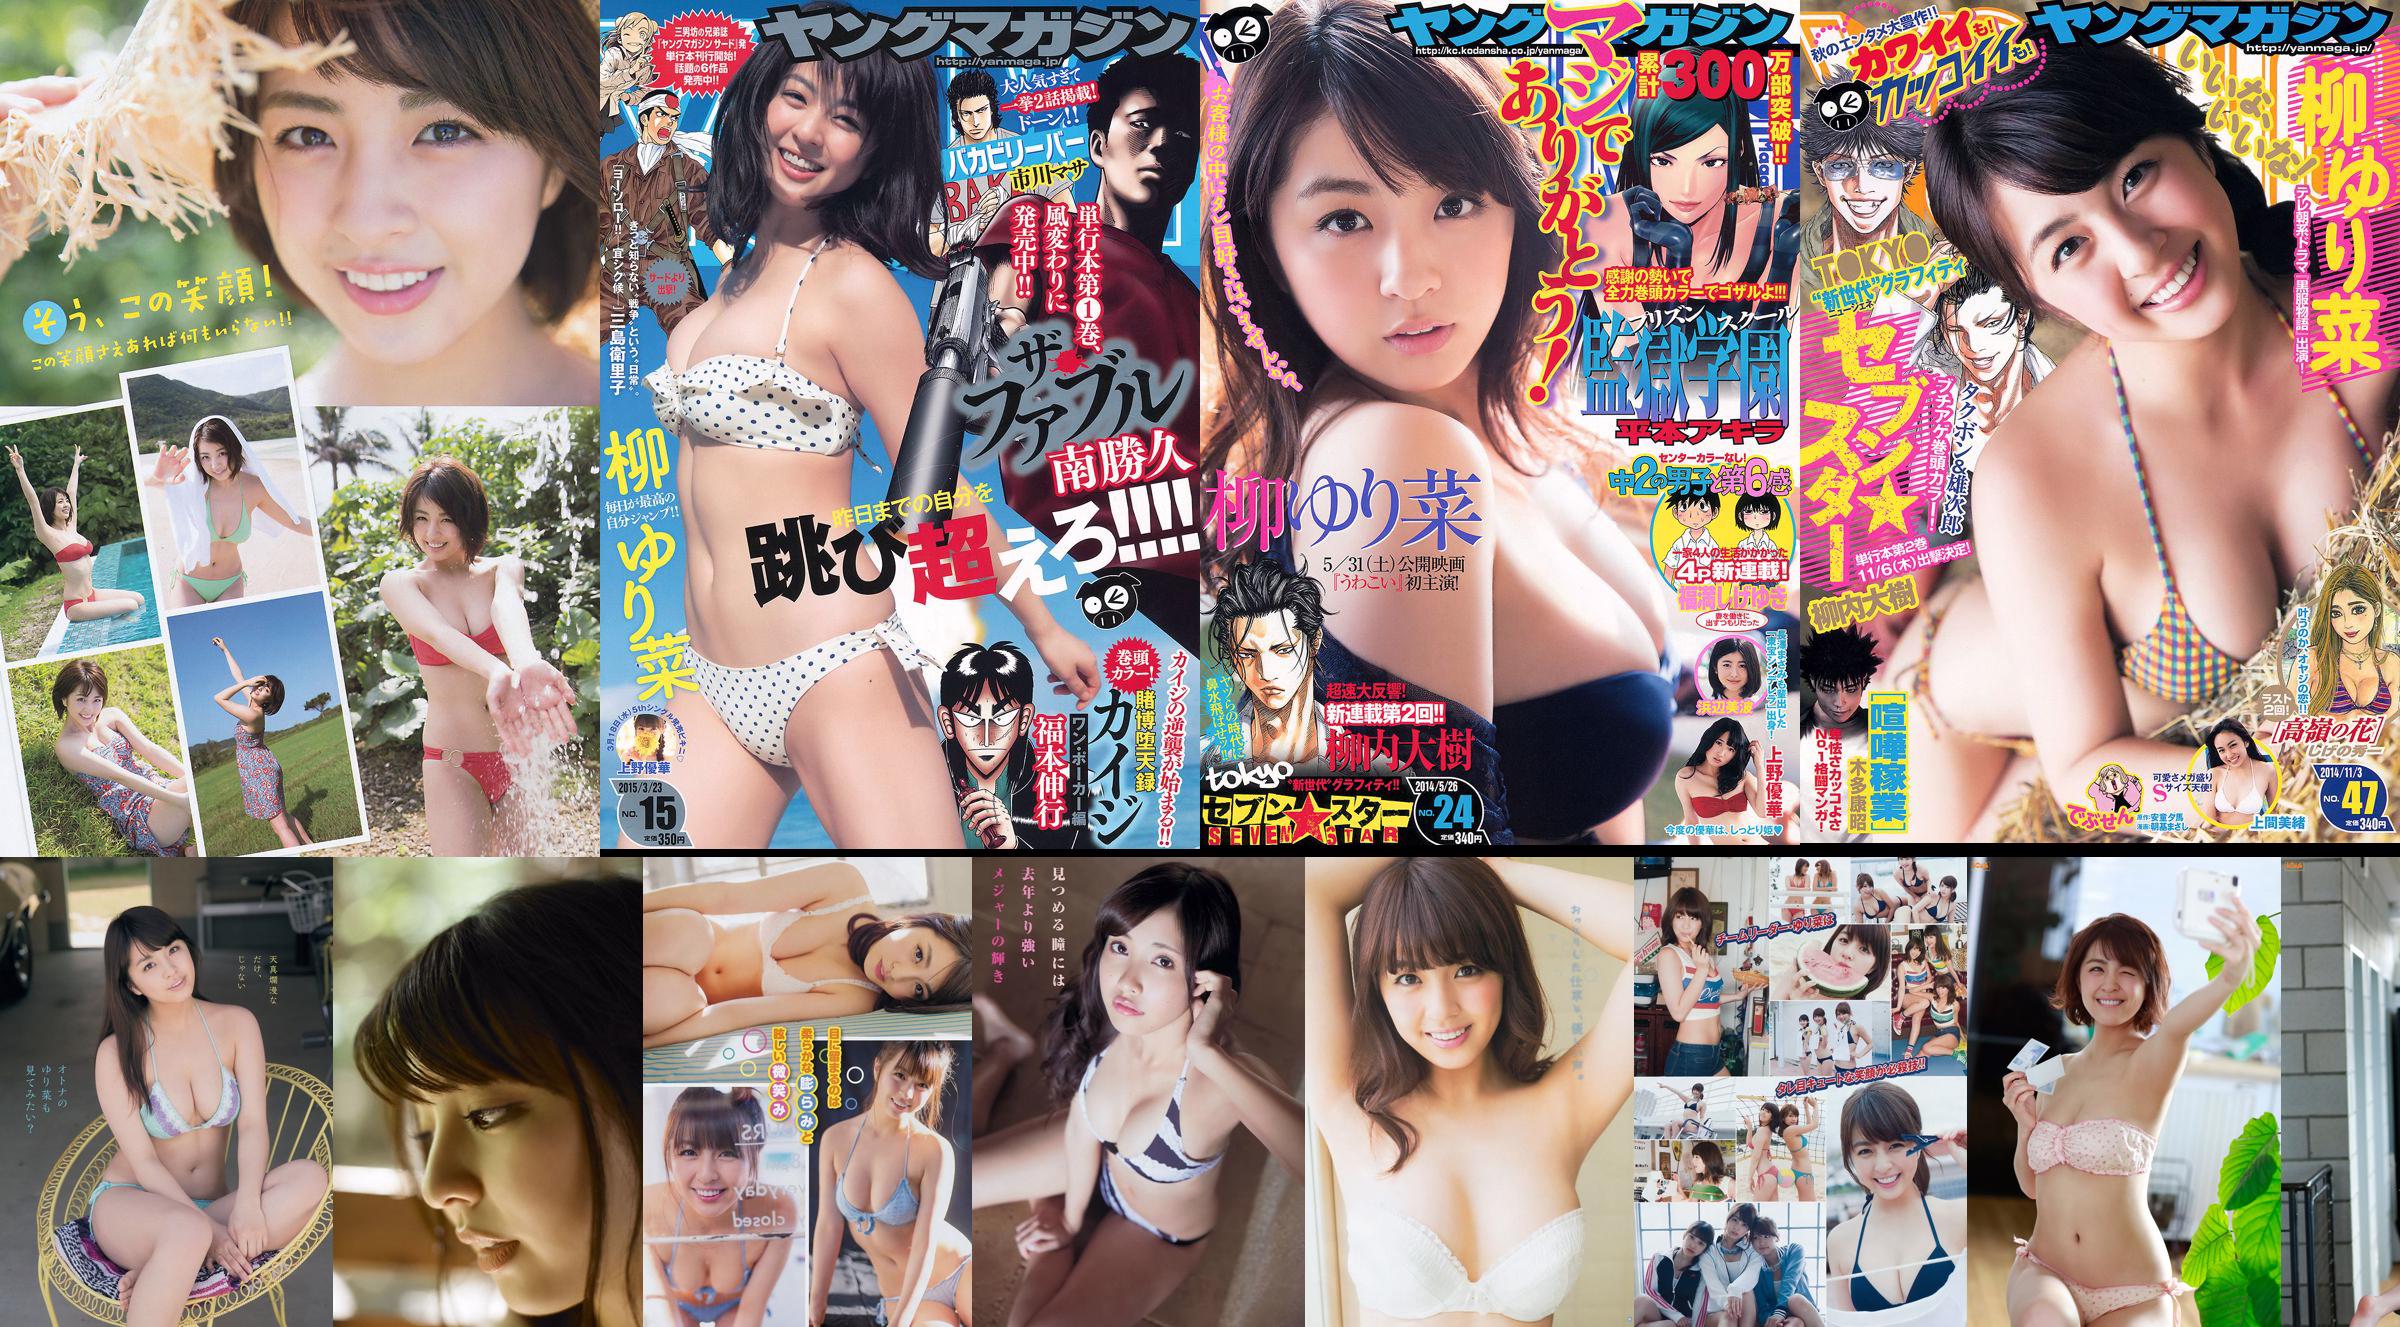 [FRIDAY] Yurina Yanagi << The most beautiful bust in Japan right now >> Photo No.e23481 Page 2